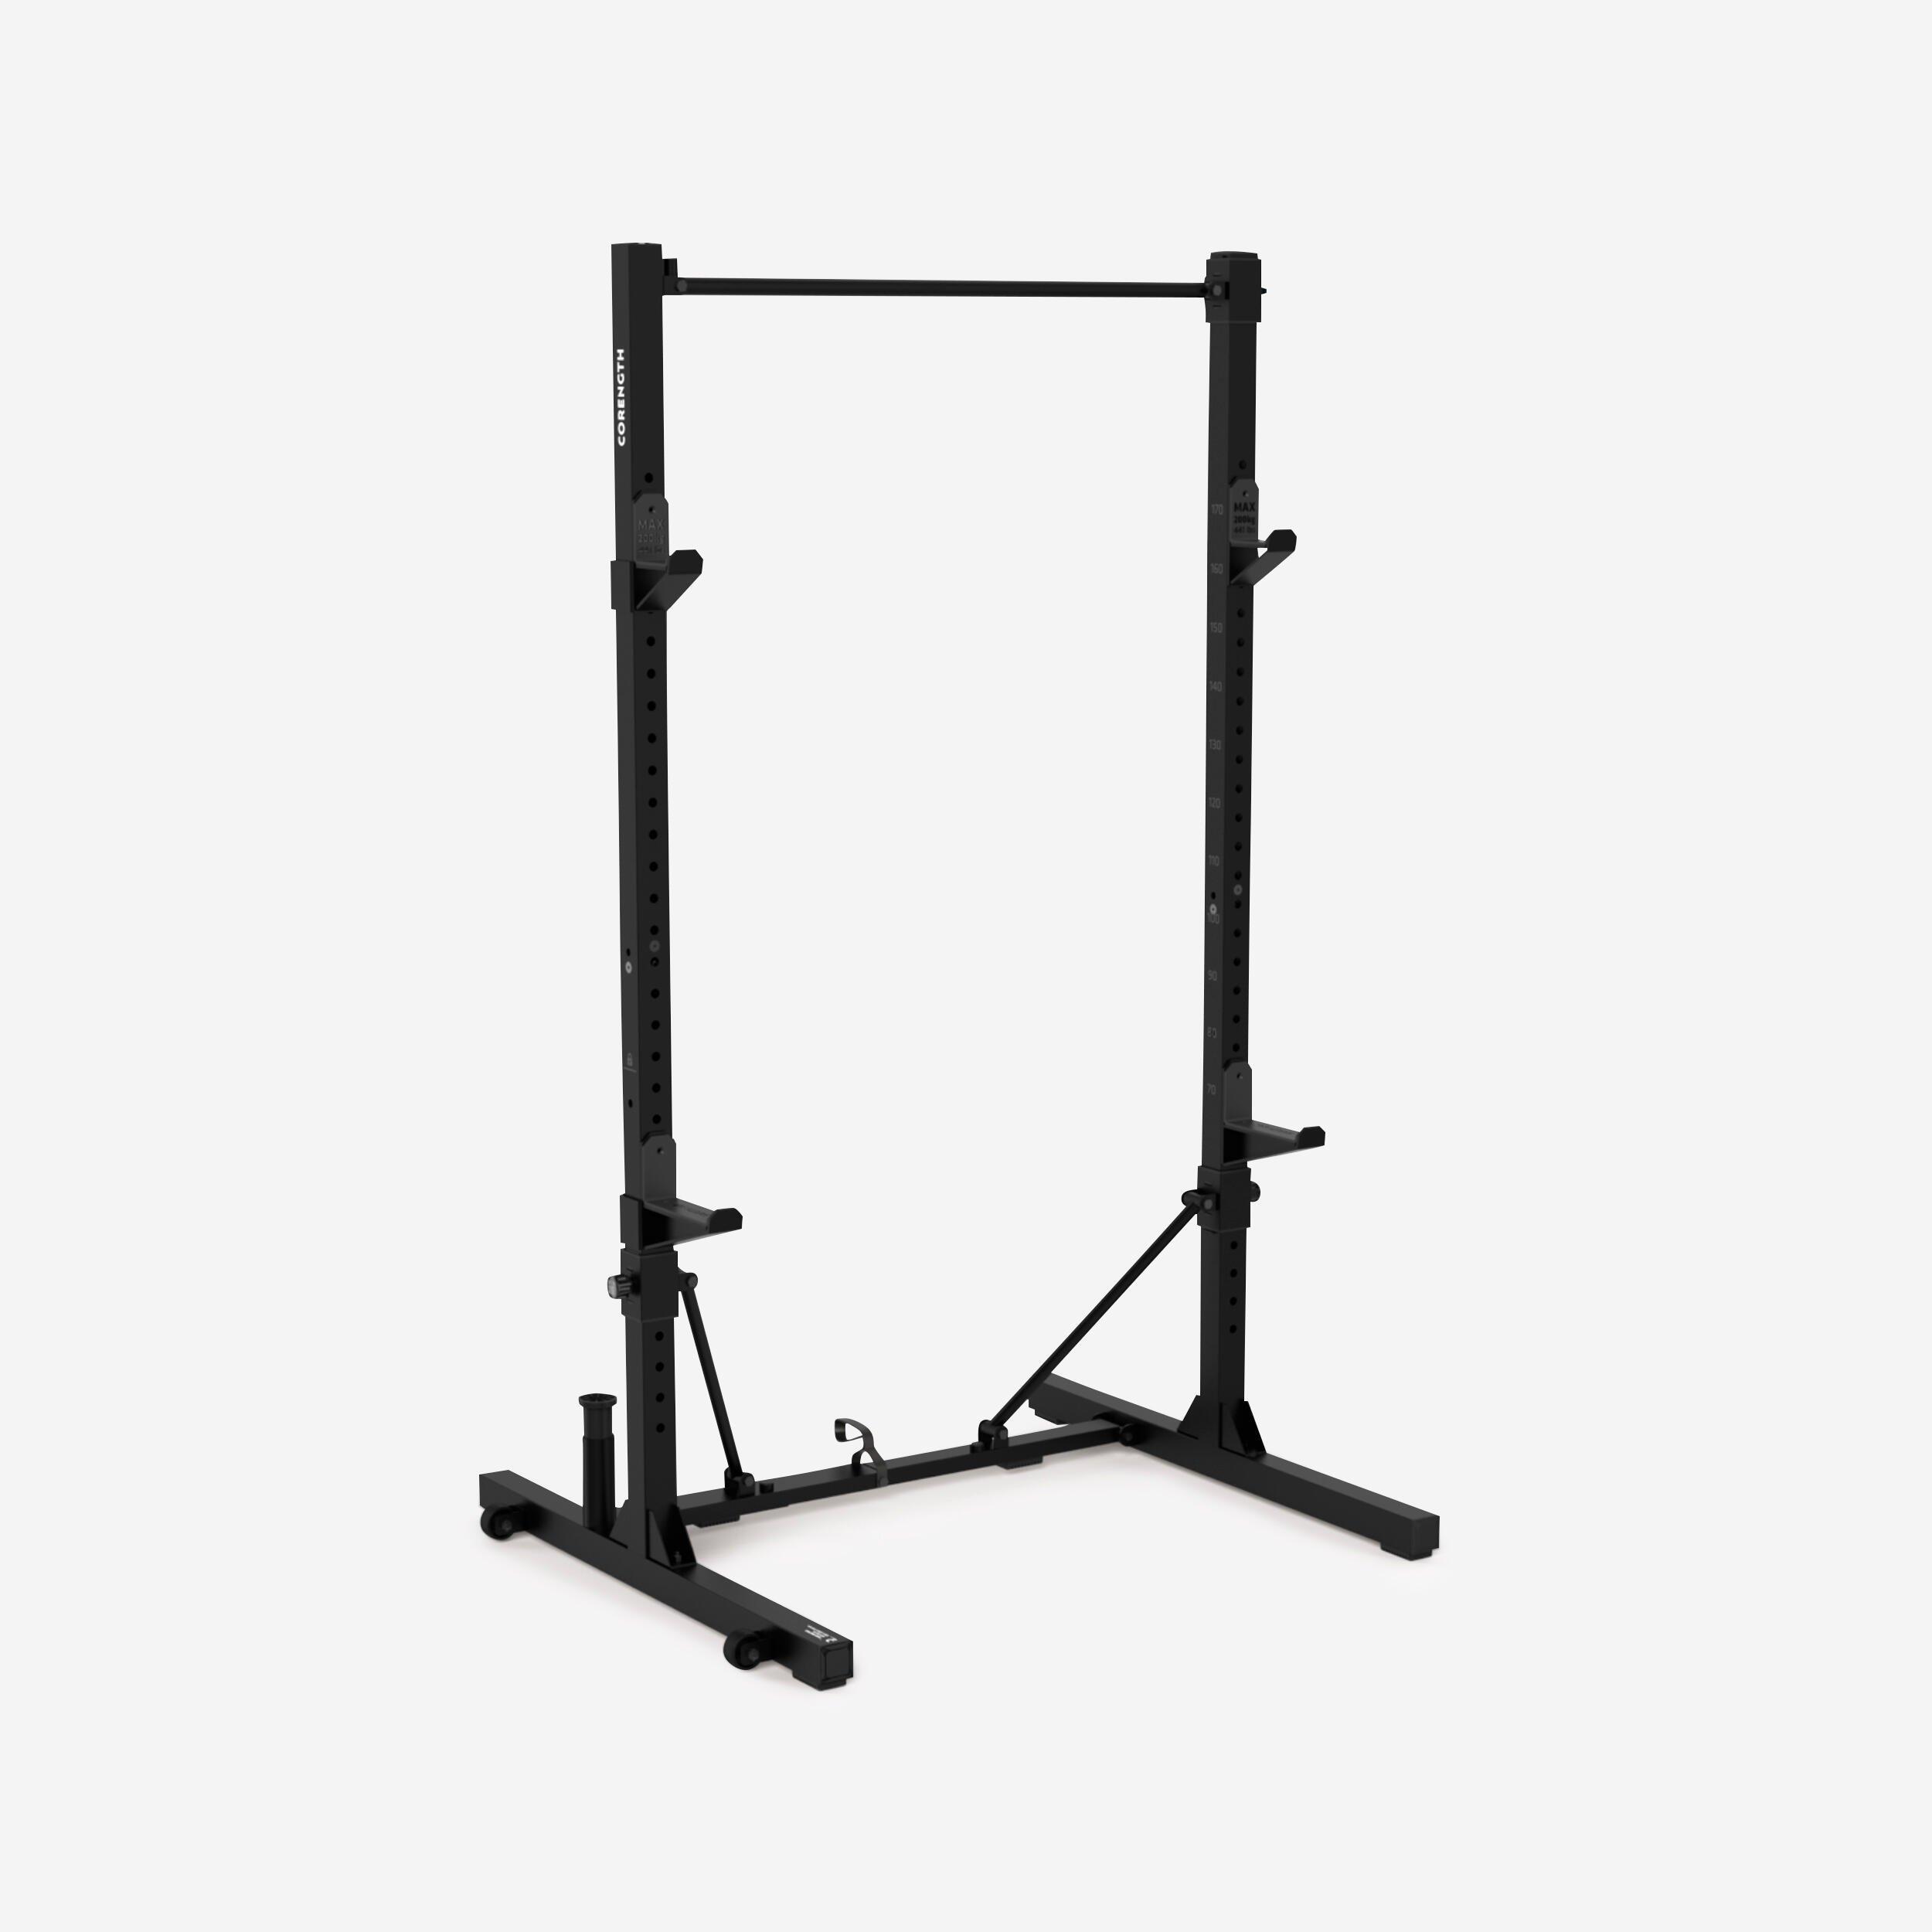 Decathlon Fold-Down/Retracting Compact Weight Training Rack For Squats And Pull-Ups